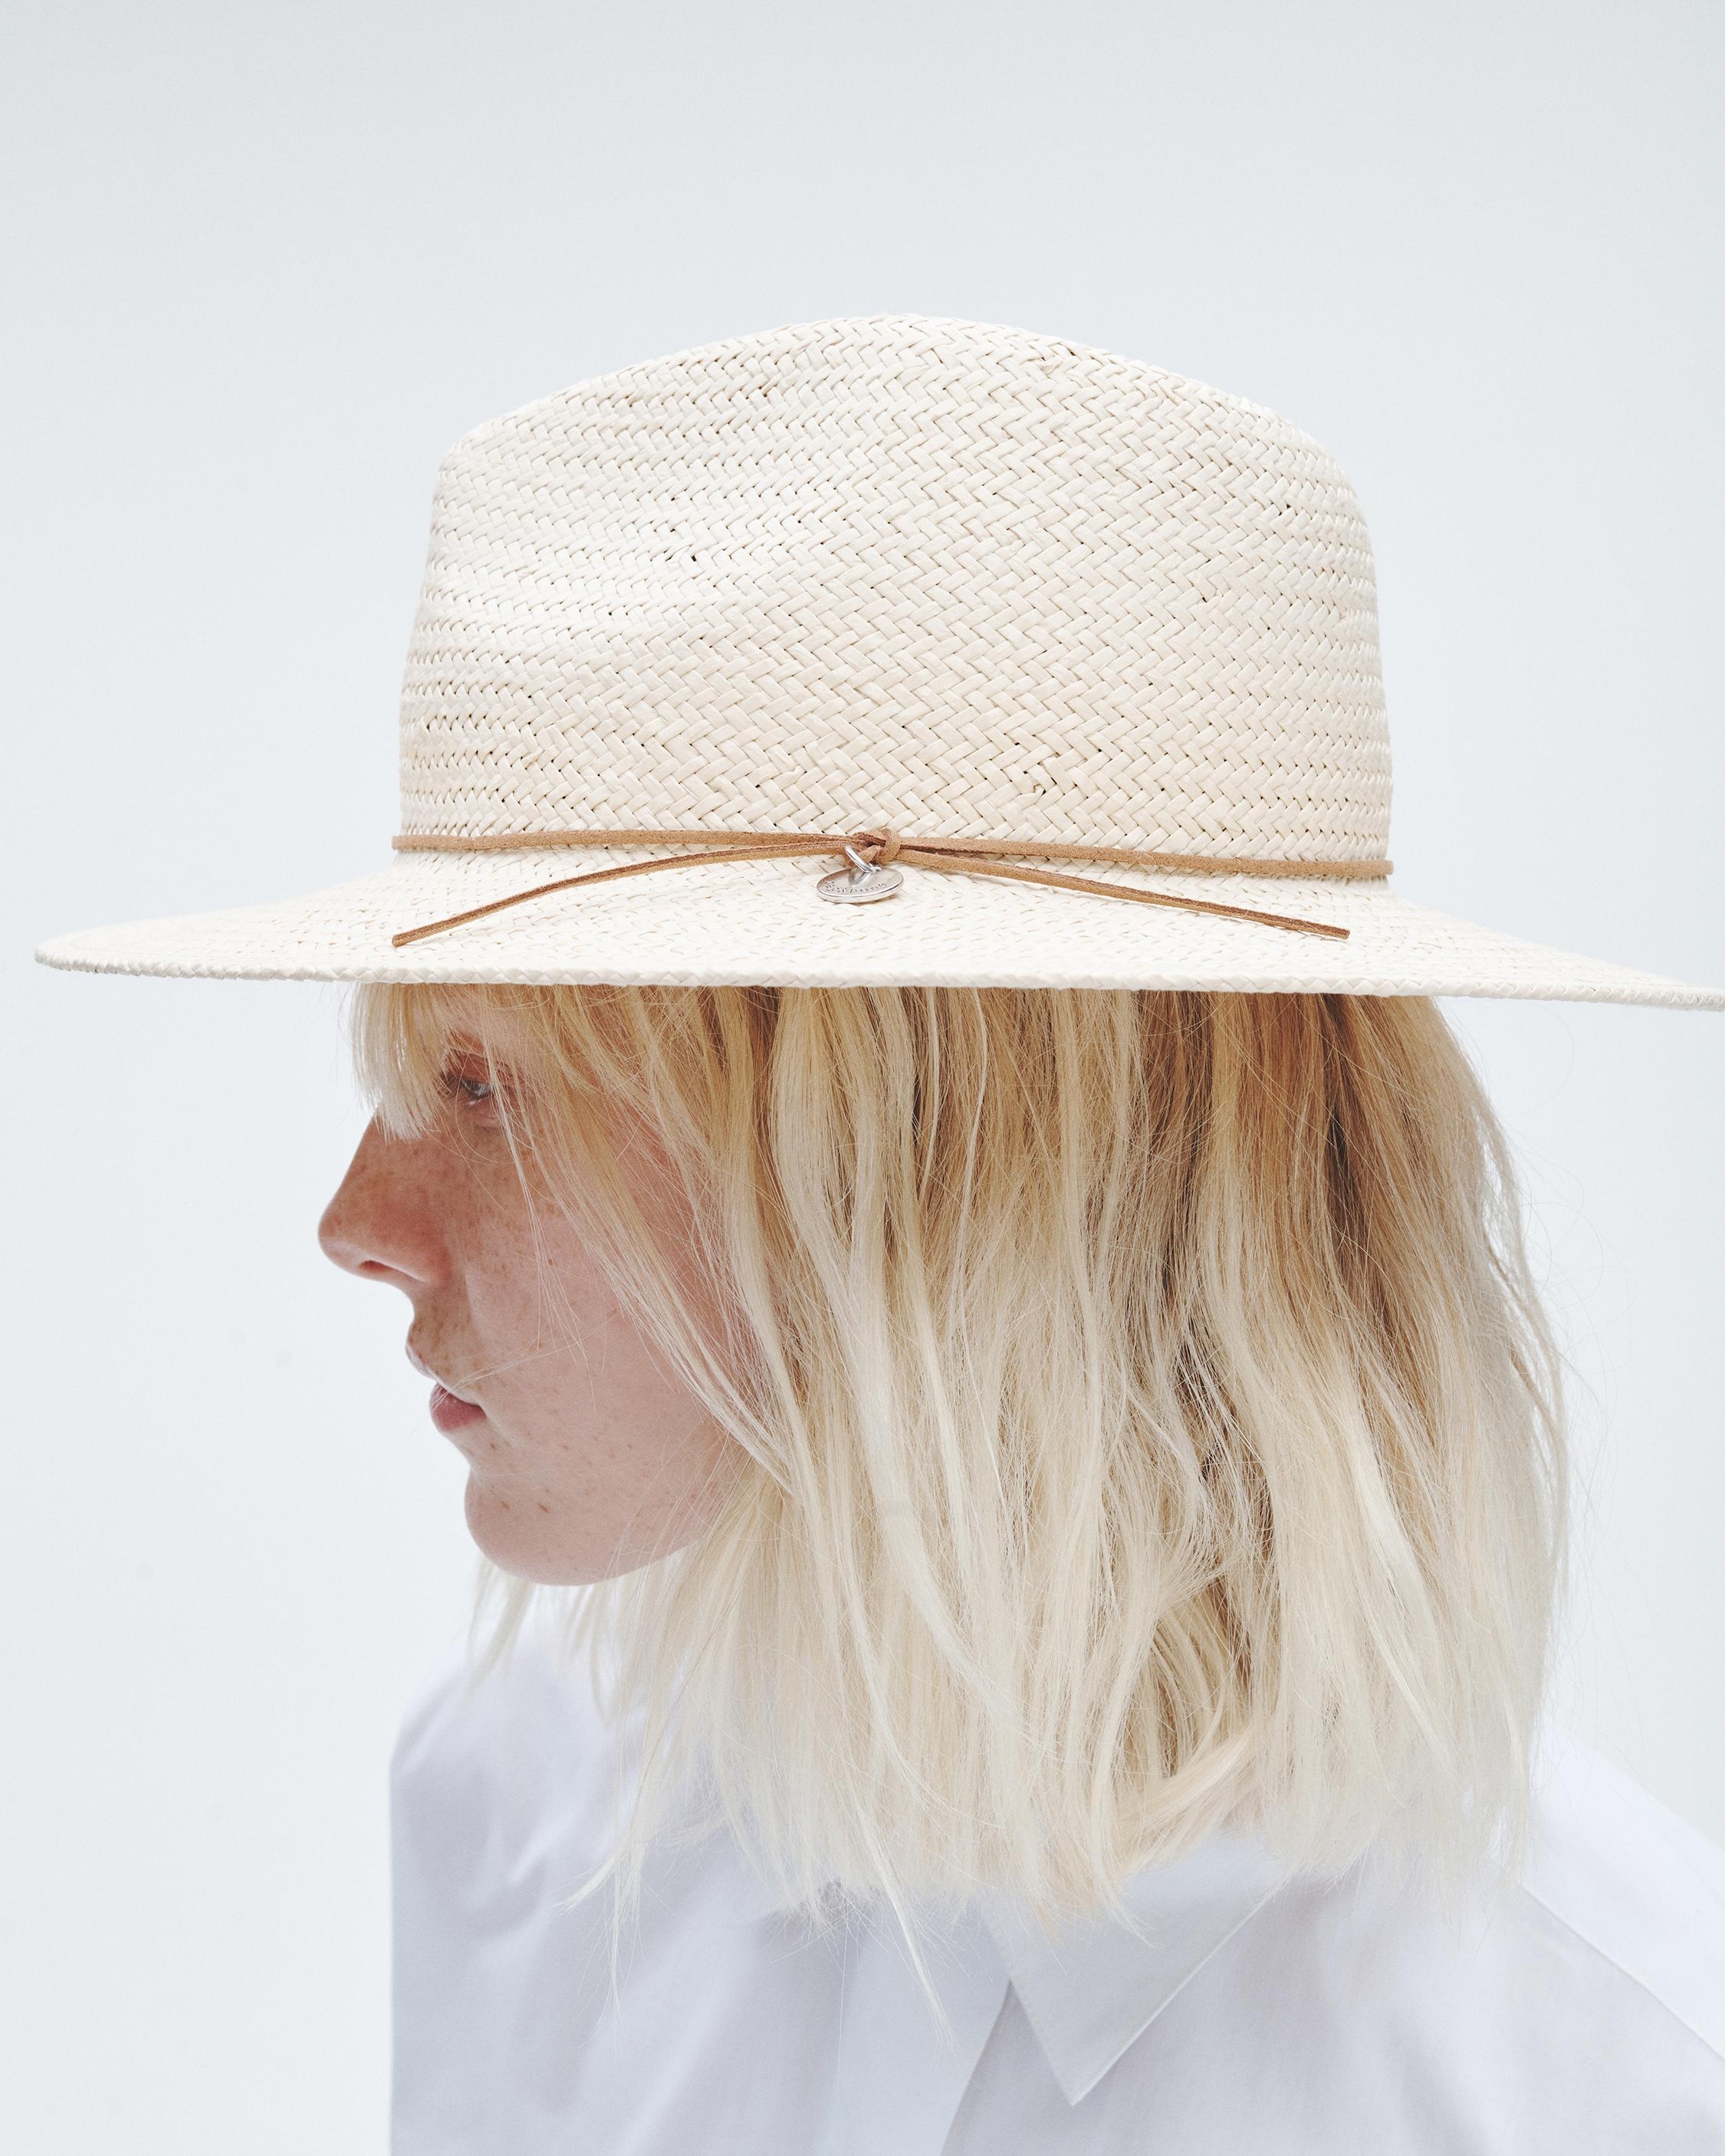 Packable Fedora
Straw Hat - 2